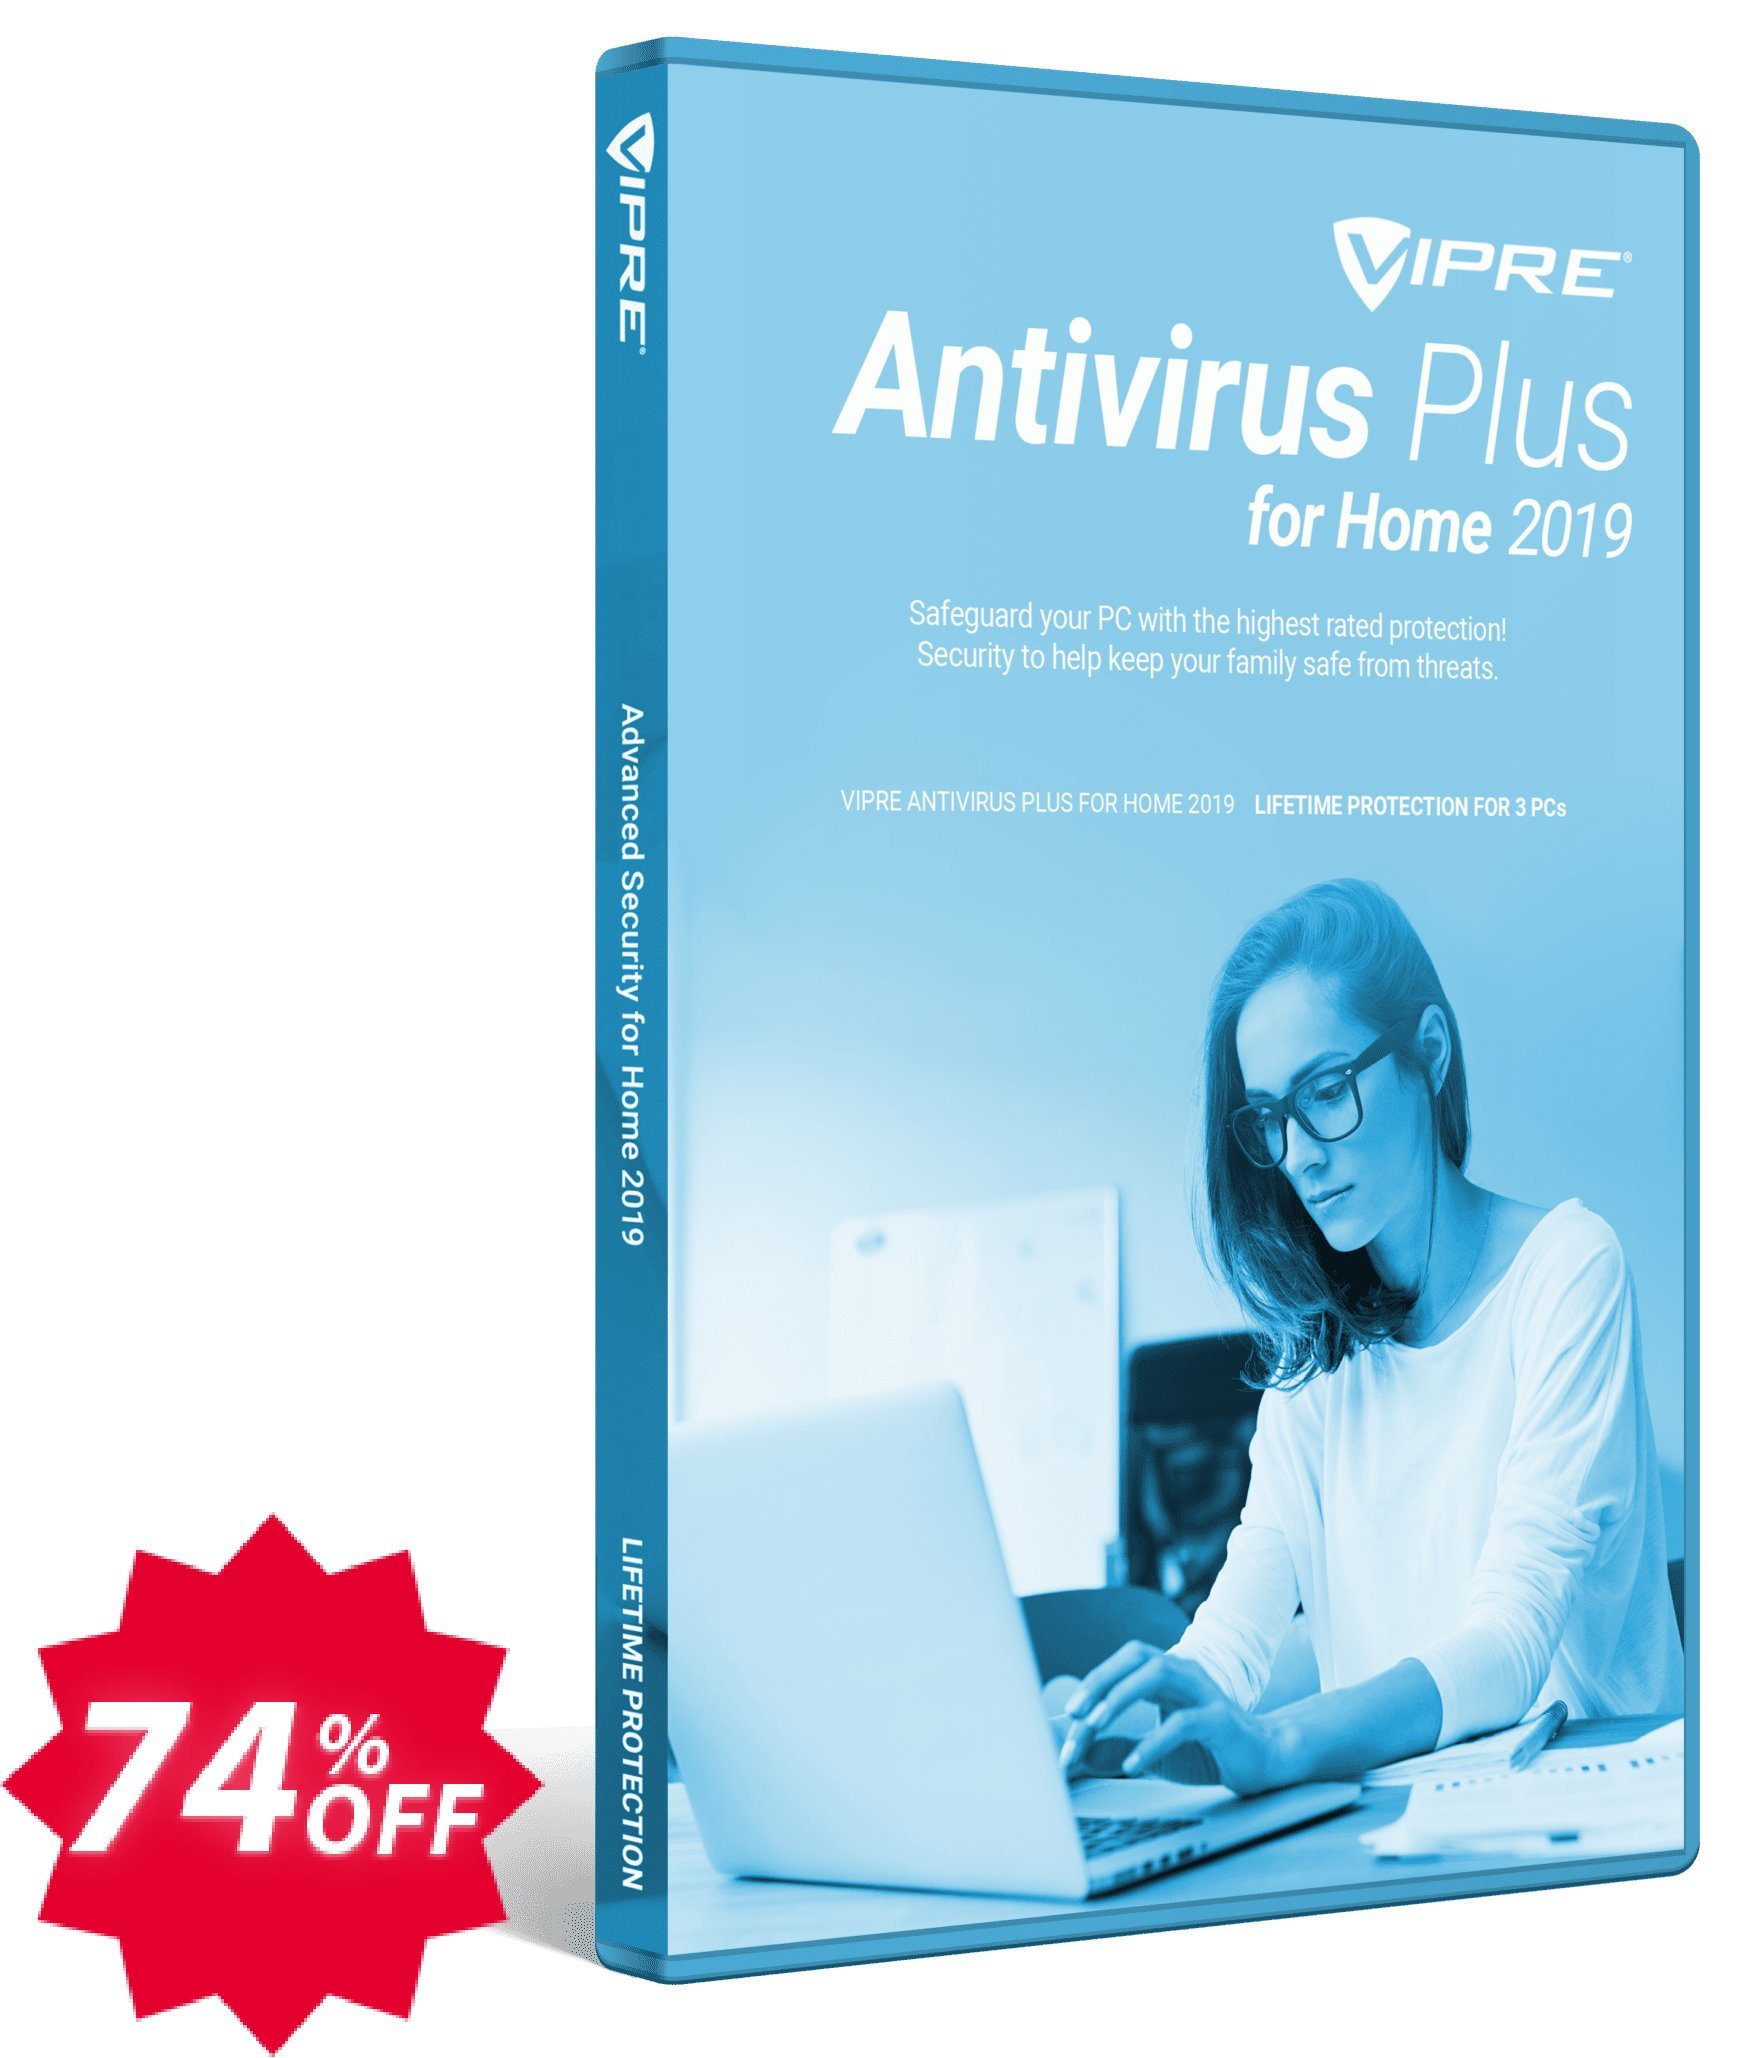 VIPRE Antivirus Plus for Home Coupon code 74% discount 